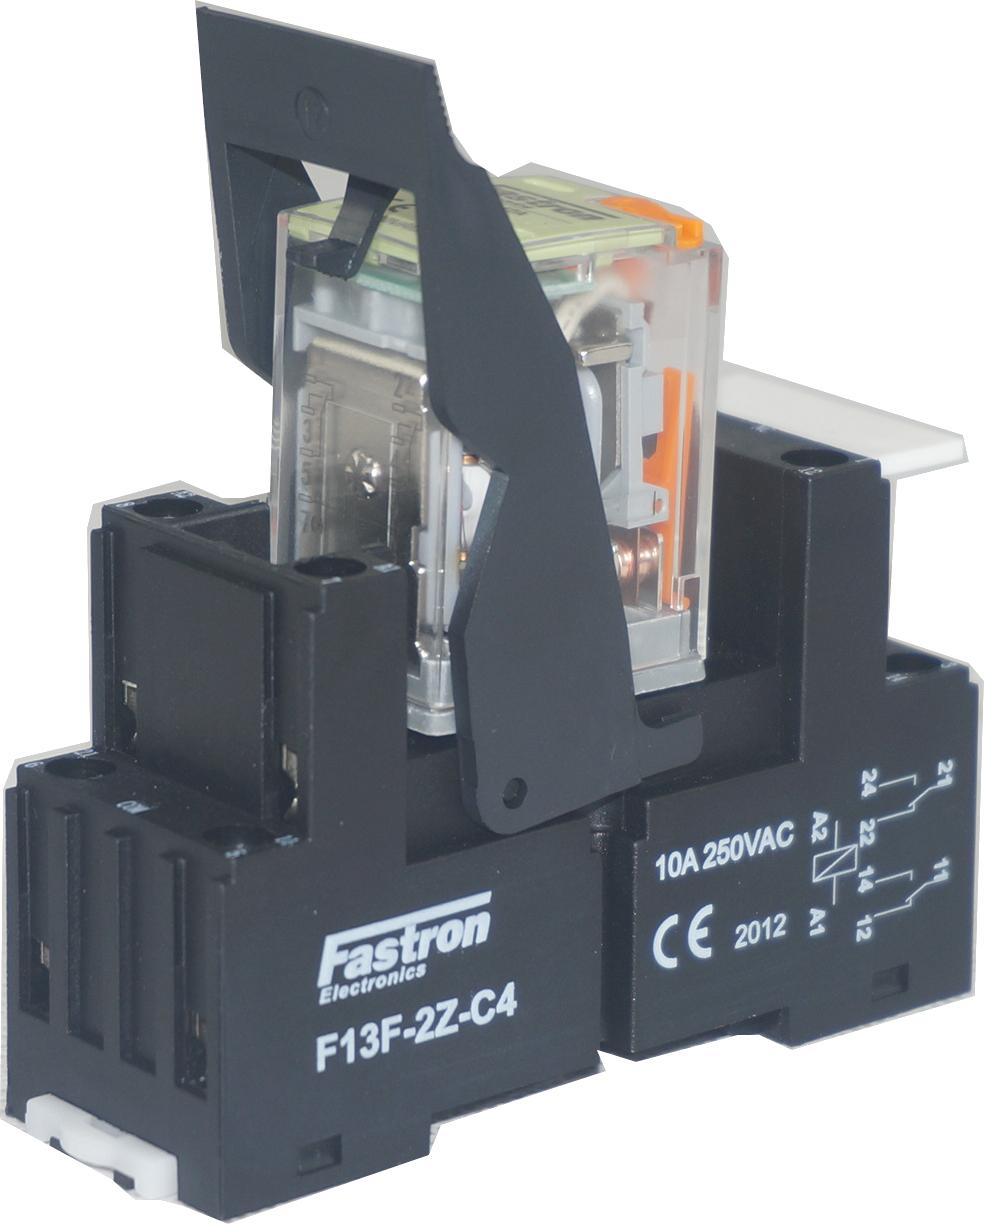 F13F-2PL 12A 240VAC + F13F-2Z-C4, DPDT Relay & Socket, 2 x 12 Amp Form C, 250VAC/30VDC Load, 240VAC Coil-Relay-Fastron Electronics-Fastron Electronics Store